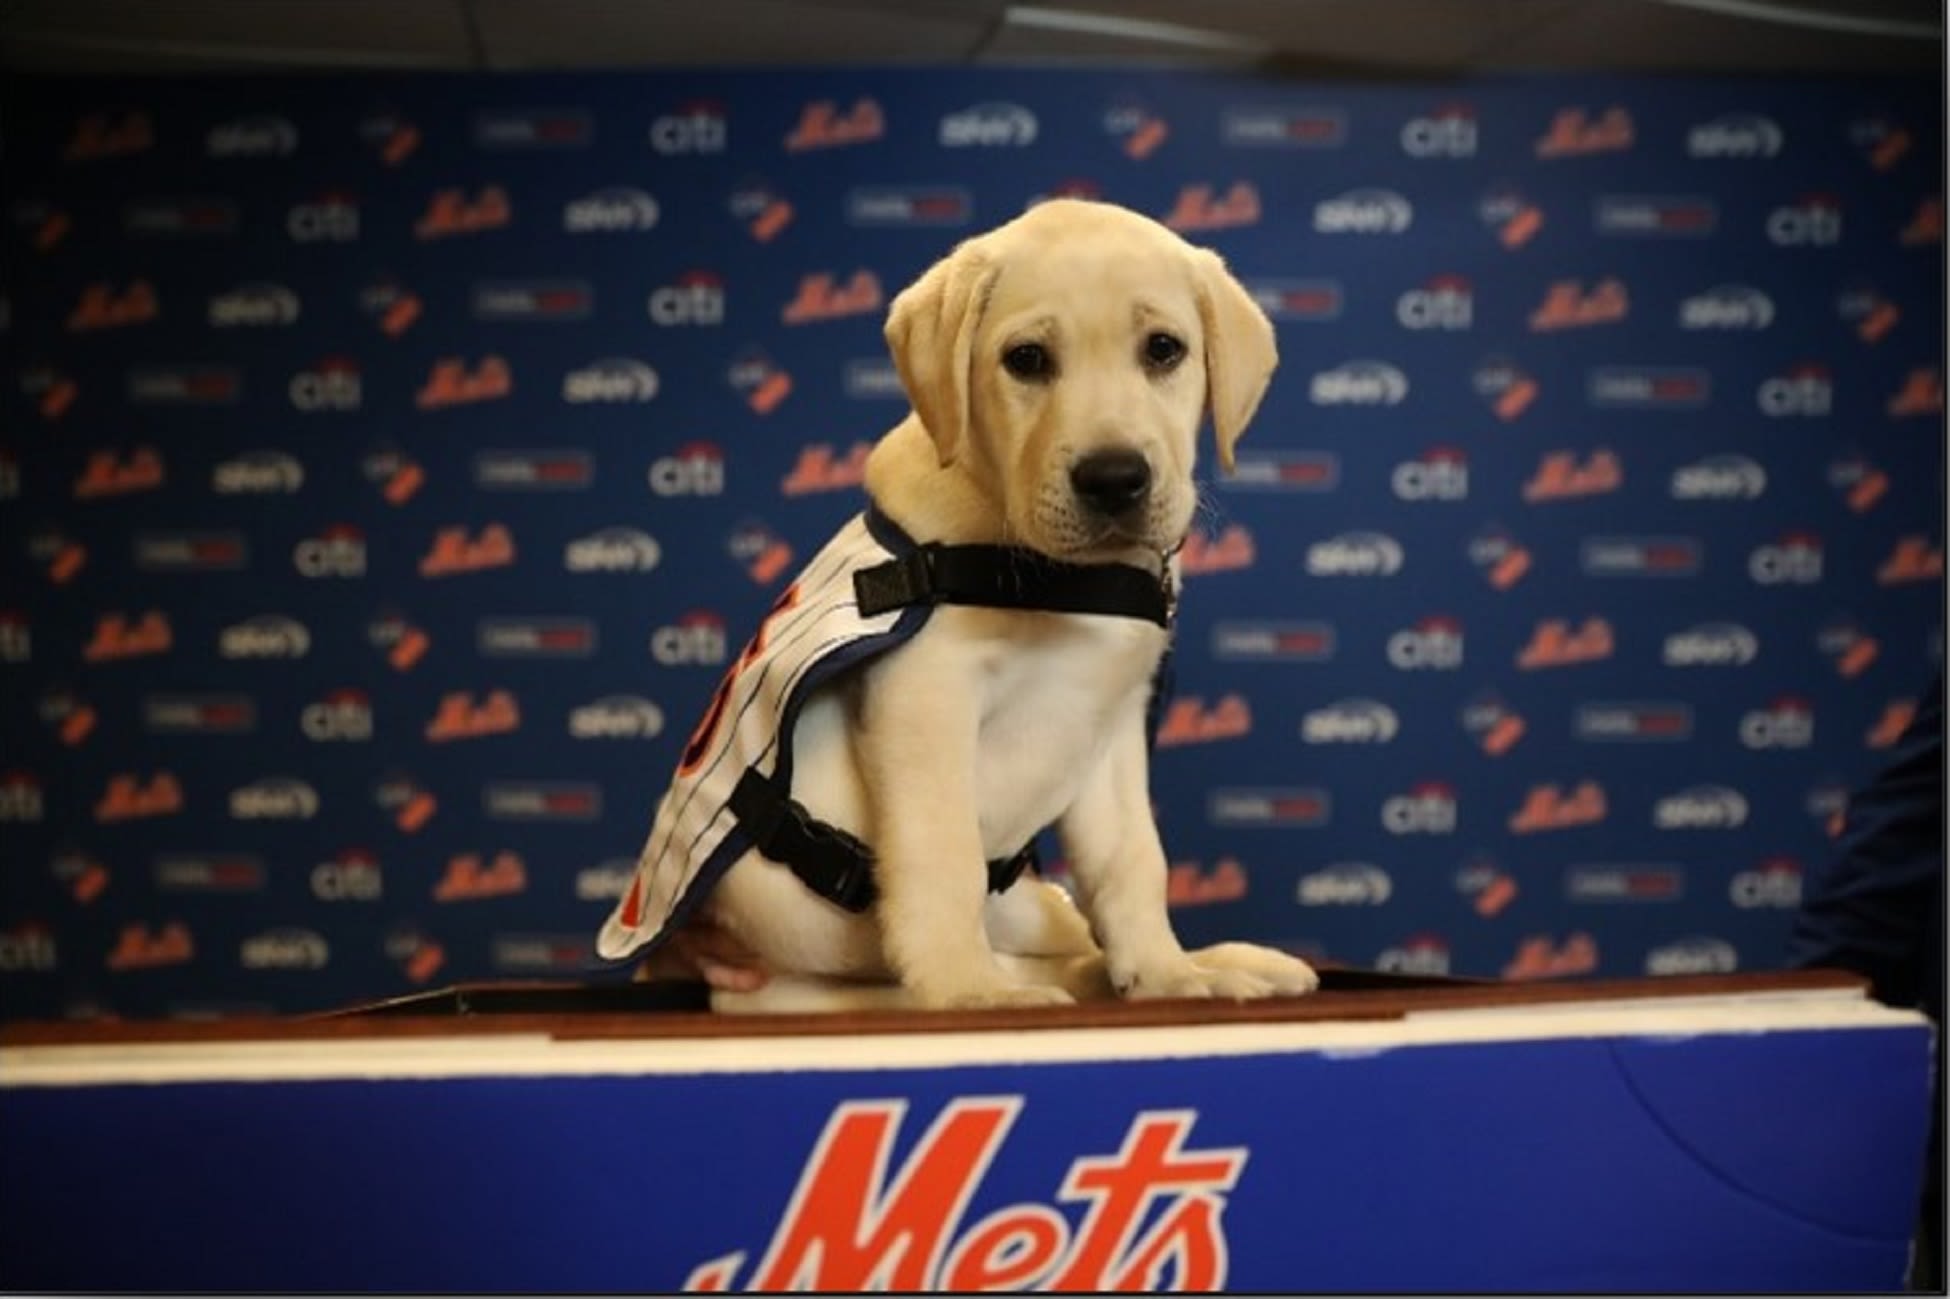 The Mets celebrated Labor Day by inviting fans to bring their dogs